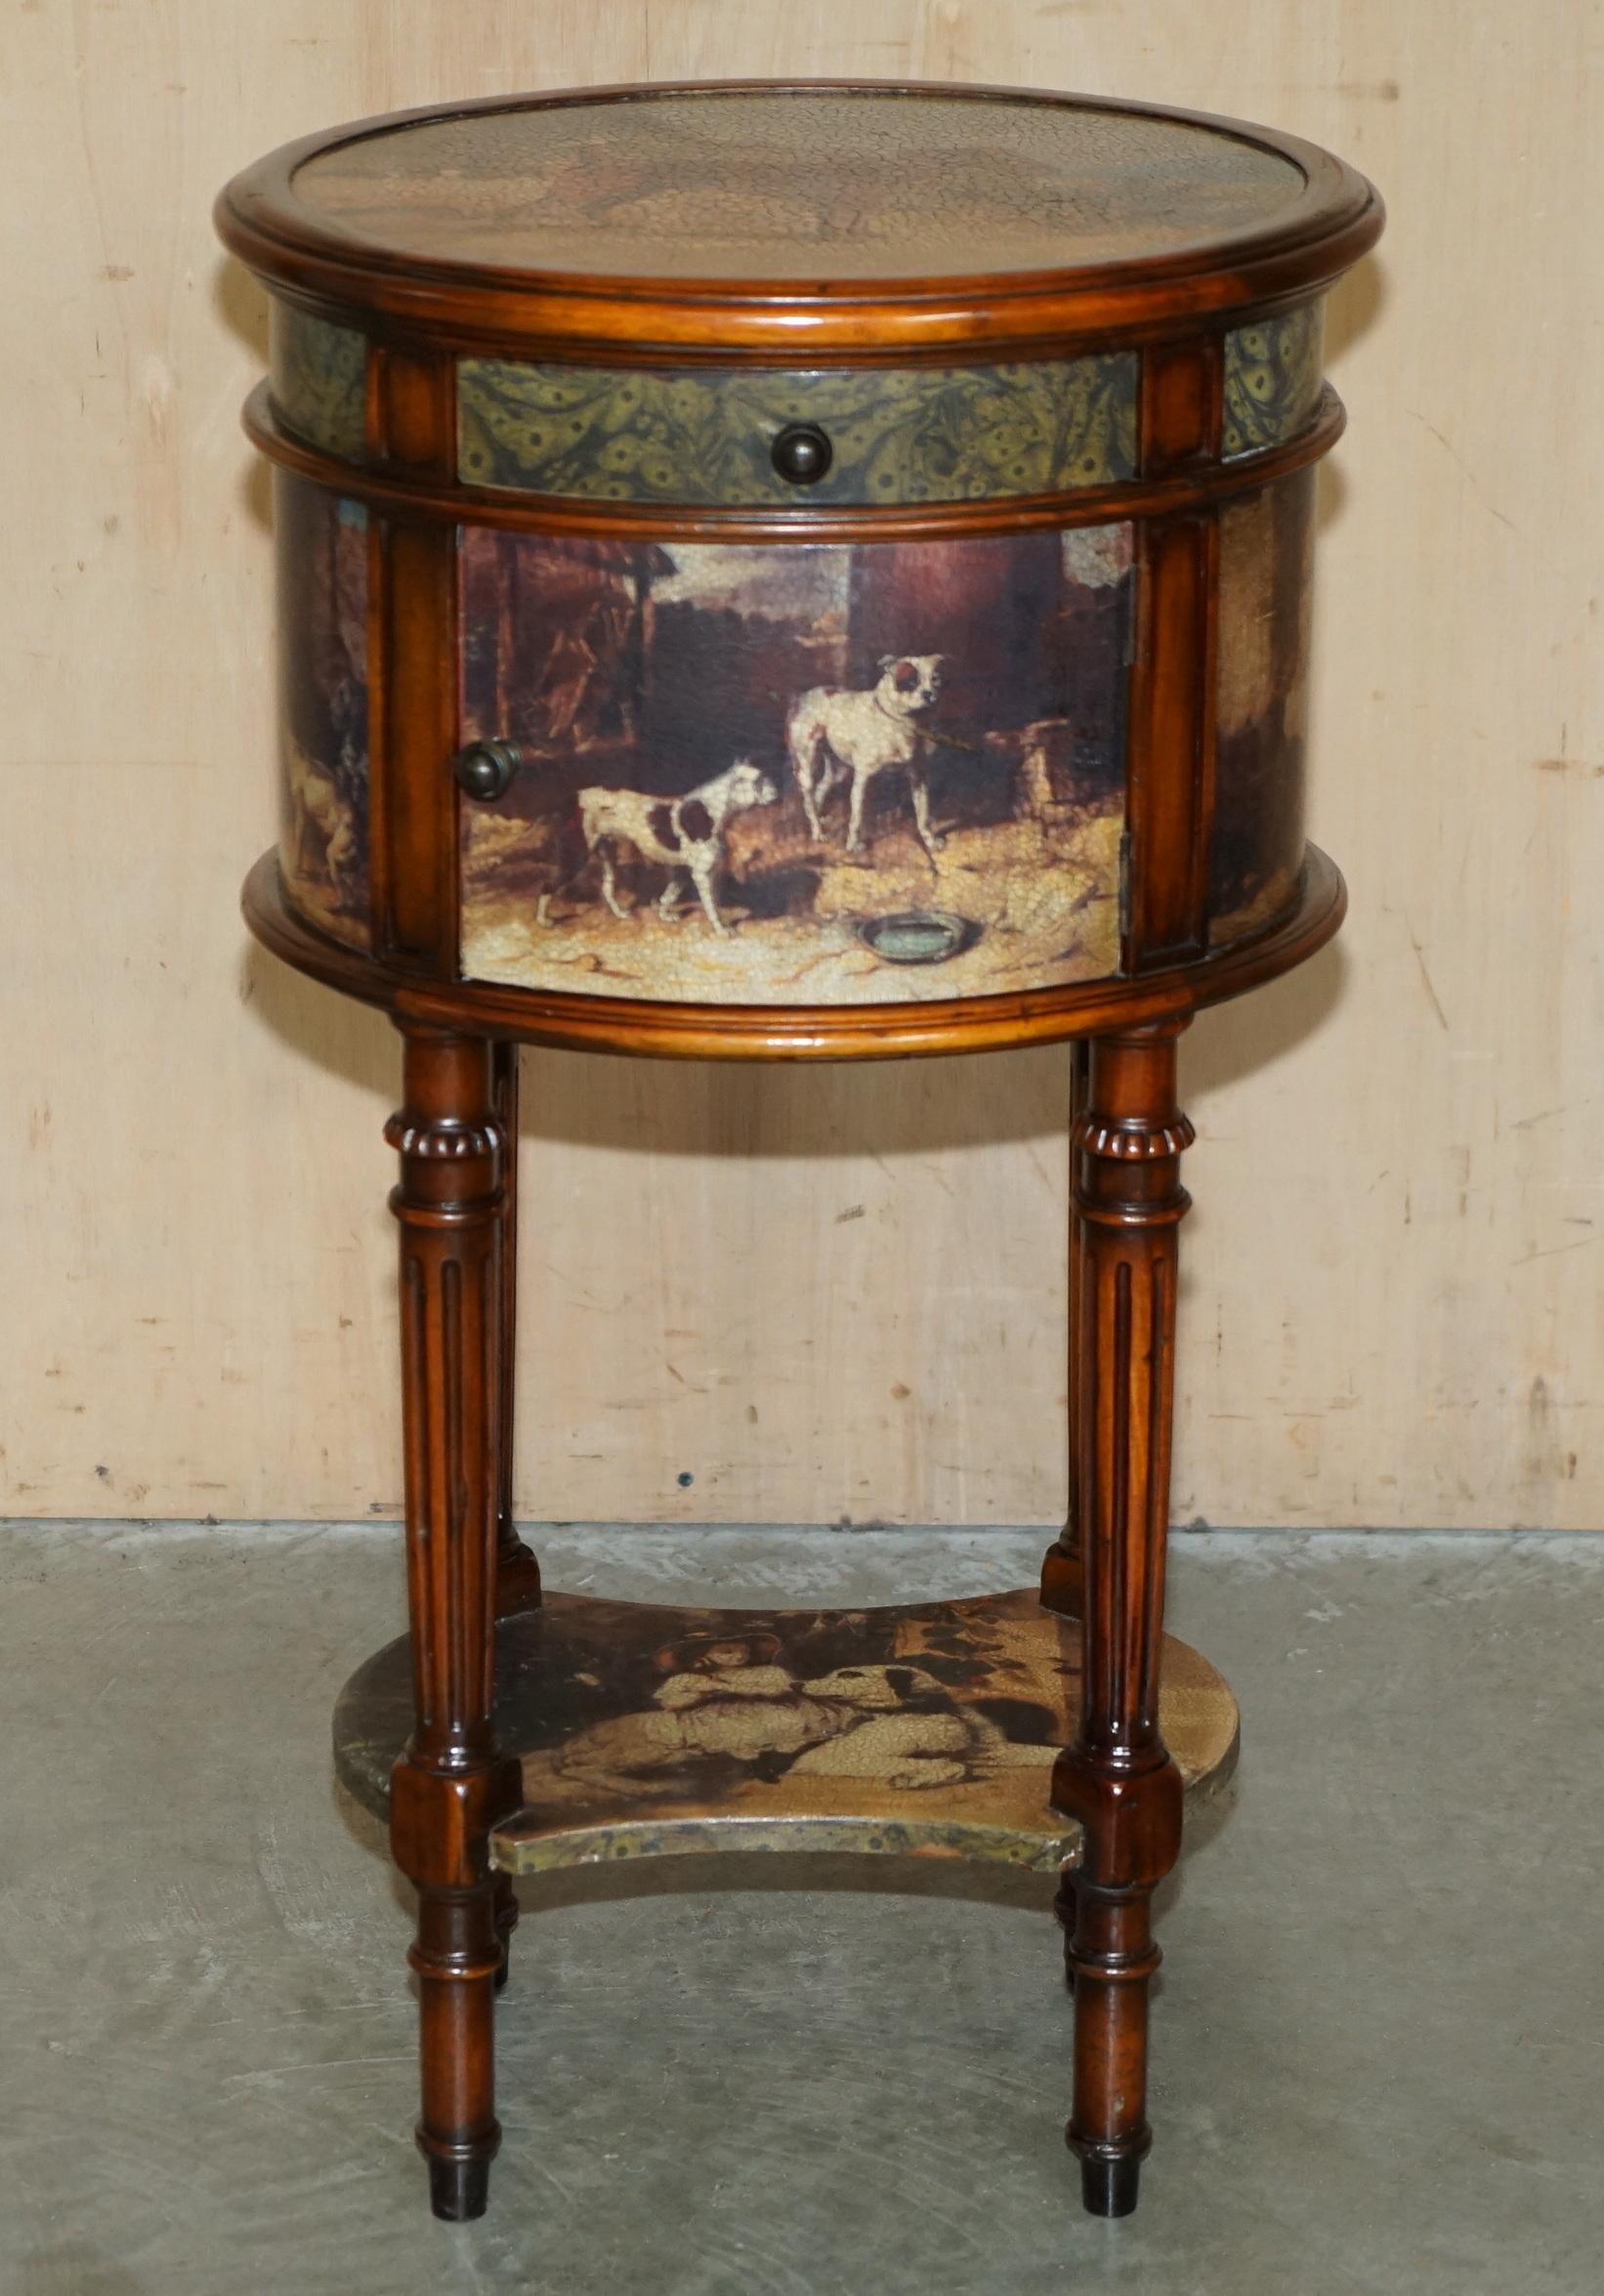 Victorian EXQUISITE TWO TIER TALL SiDE TABLE CABINET LEATHER CLADDED & PAINTED WITH DOGS For Sale